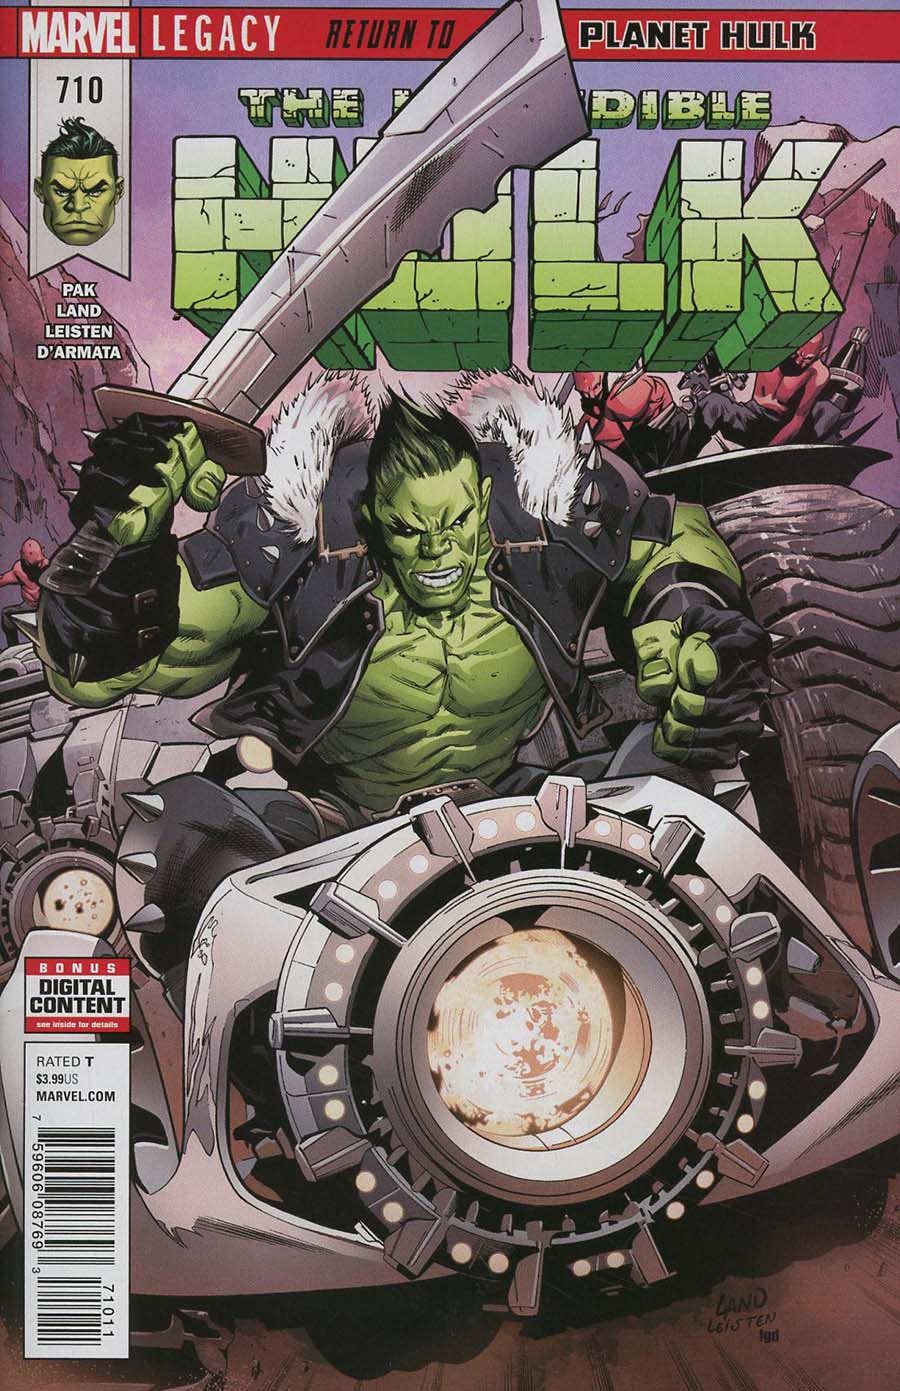 Incredible Hulk Vol 4 #710 Cover A 1st Ptg Regular Greg Land Cover (Marvel Legacy Tie-In)